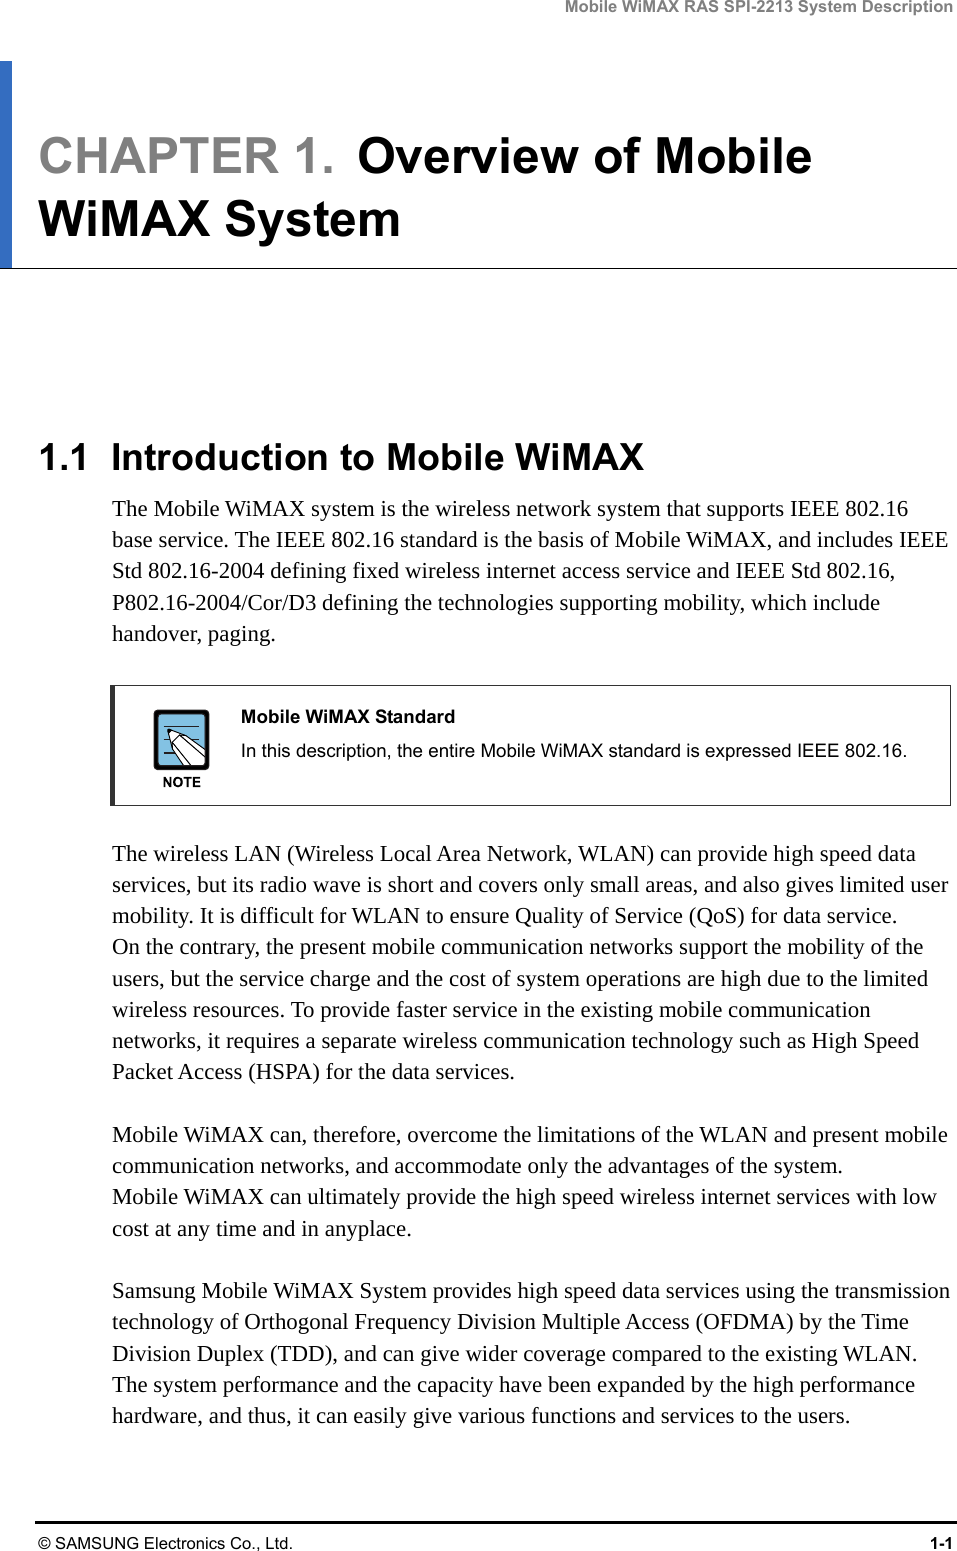 Mobile WiMAX RAS SPI-2213 System Description © SAMSUNG Electronics Co., Ltd.  1-1 CHAPTER 1.  Overview of Mobile WiMAX System      1.1  Introduction to Mobile WiMAX The Mobile WiMAX system is the wireless network system that supports IEEE 802.16 base service. The IEEE 802.16 standard is the basis of Mobile WiMAX, and includes IEEE Std 802.16-2004 defining fixed wireless internet access service and IEEE Std 802.16, P802.16-2004/Cor/D3 defining the technologies supporting mobility, which include handover, paging.   Mobile WiMAX Standard   In this description, the entire Mobile WiMAX standard is expressed IEEE 802.16.  The wireless LAN (Wireless Local Area Network, WLAN) can provide high speed data services, but its radio wave is short and covers only small areas, and also gives limited user mobility. It is difficult for WLAN to ensure Quality of Service (QoS) for data service.   On the contrary, the present mobile communication networks support the mobility of the users, but the service charge and the cost of system operations are high due to the limited wireless resources. To provide faster service in the existing mobile communication networks, it requires a separate wireless communication technology such as High Speed Packet Access (HSPA) for the data services.  Mobile WiMAX can, therefore, overcome the limitations of the WLAN and present mobile communication networks, and accommodate only the advantages of the system.   Mobile WiMAX can ultimately provide the high speed wireless internet services with low cost at any time and in anyplace.  Samsung Mobile WiMAX System provides high speed data services using the transmission technology of Orthogonal Frequency Division Multiple Access (OFDMA) by the Time Division Duplex (TDD), and can give wider coverage compared to the existing WLAN. The system performance and the capacity have been expanded by the high performance hardware, and thus, it can easily give various functions and services to the users.  